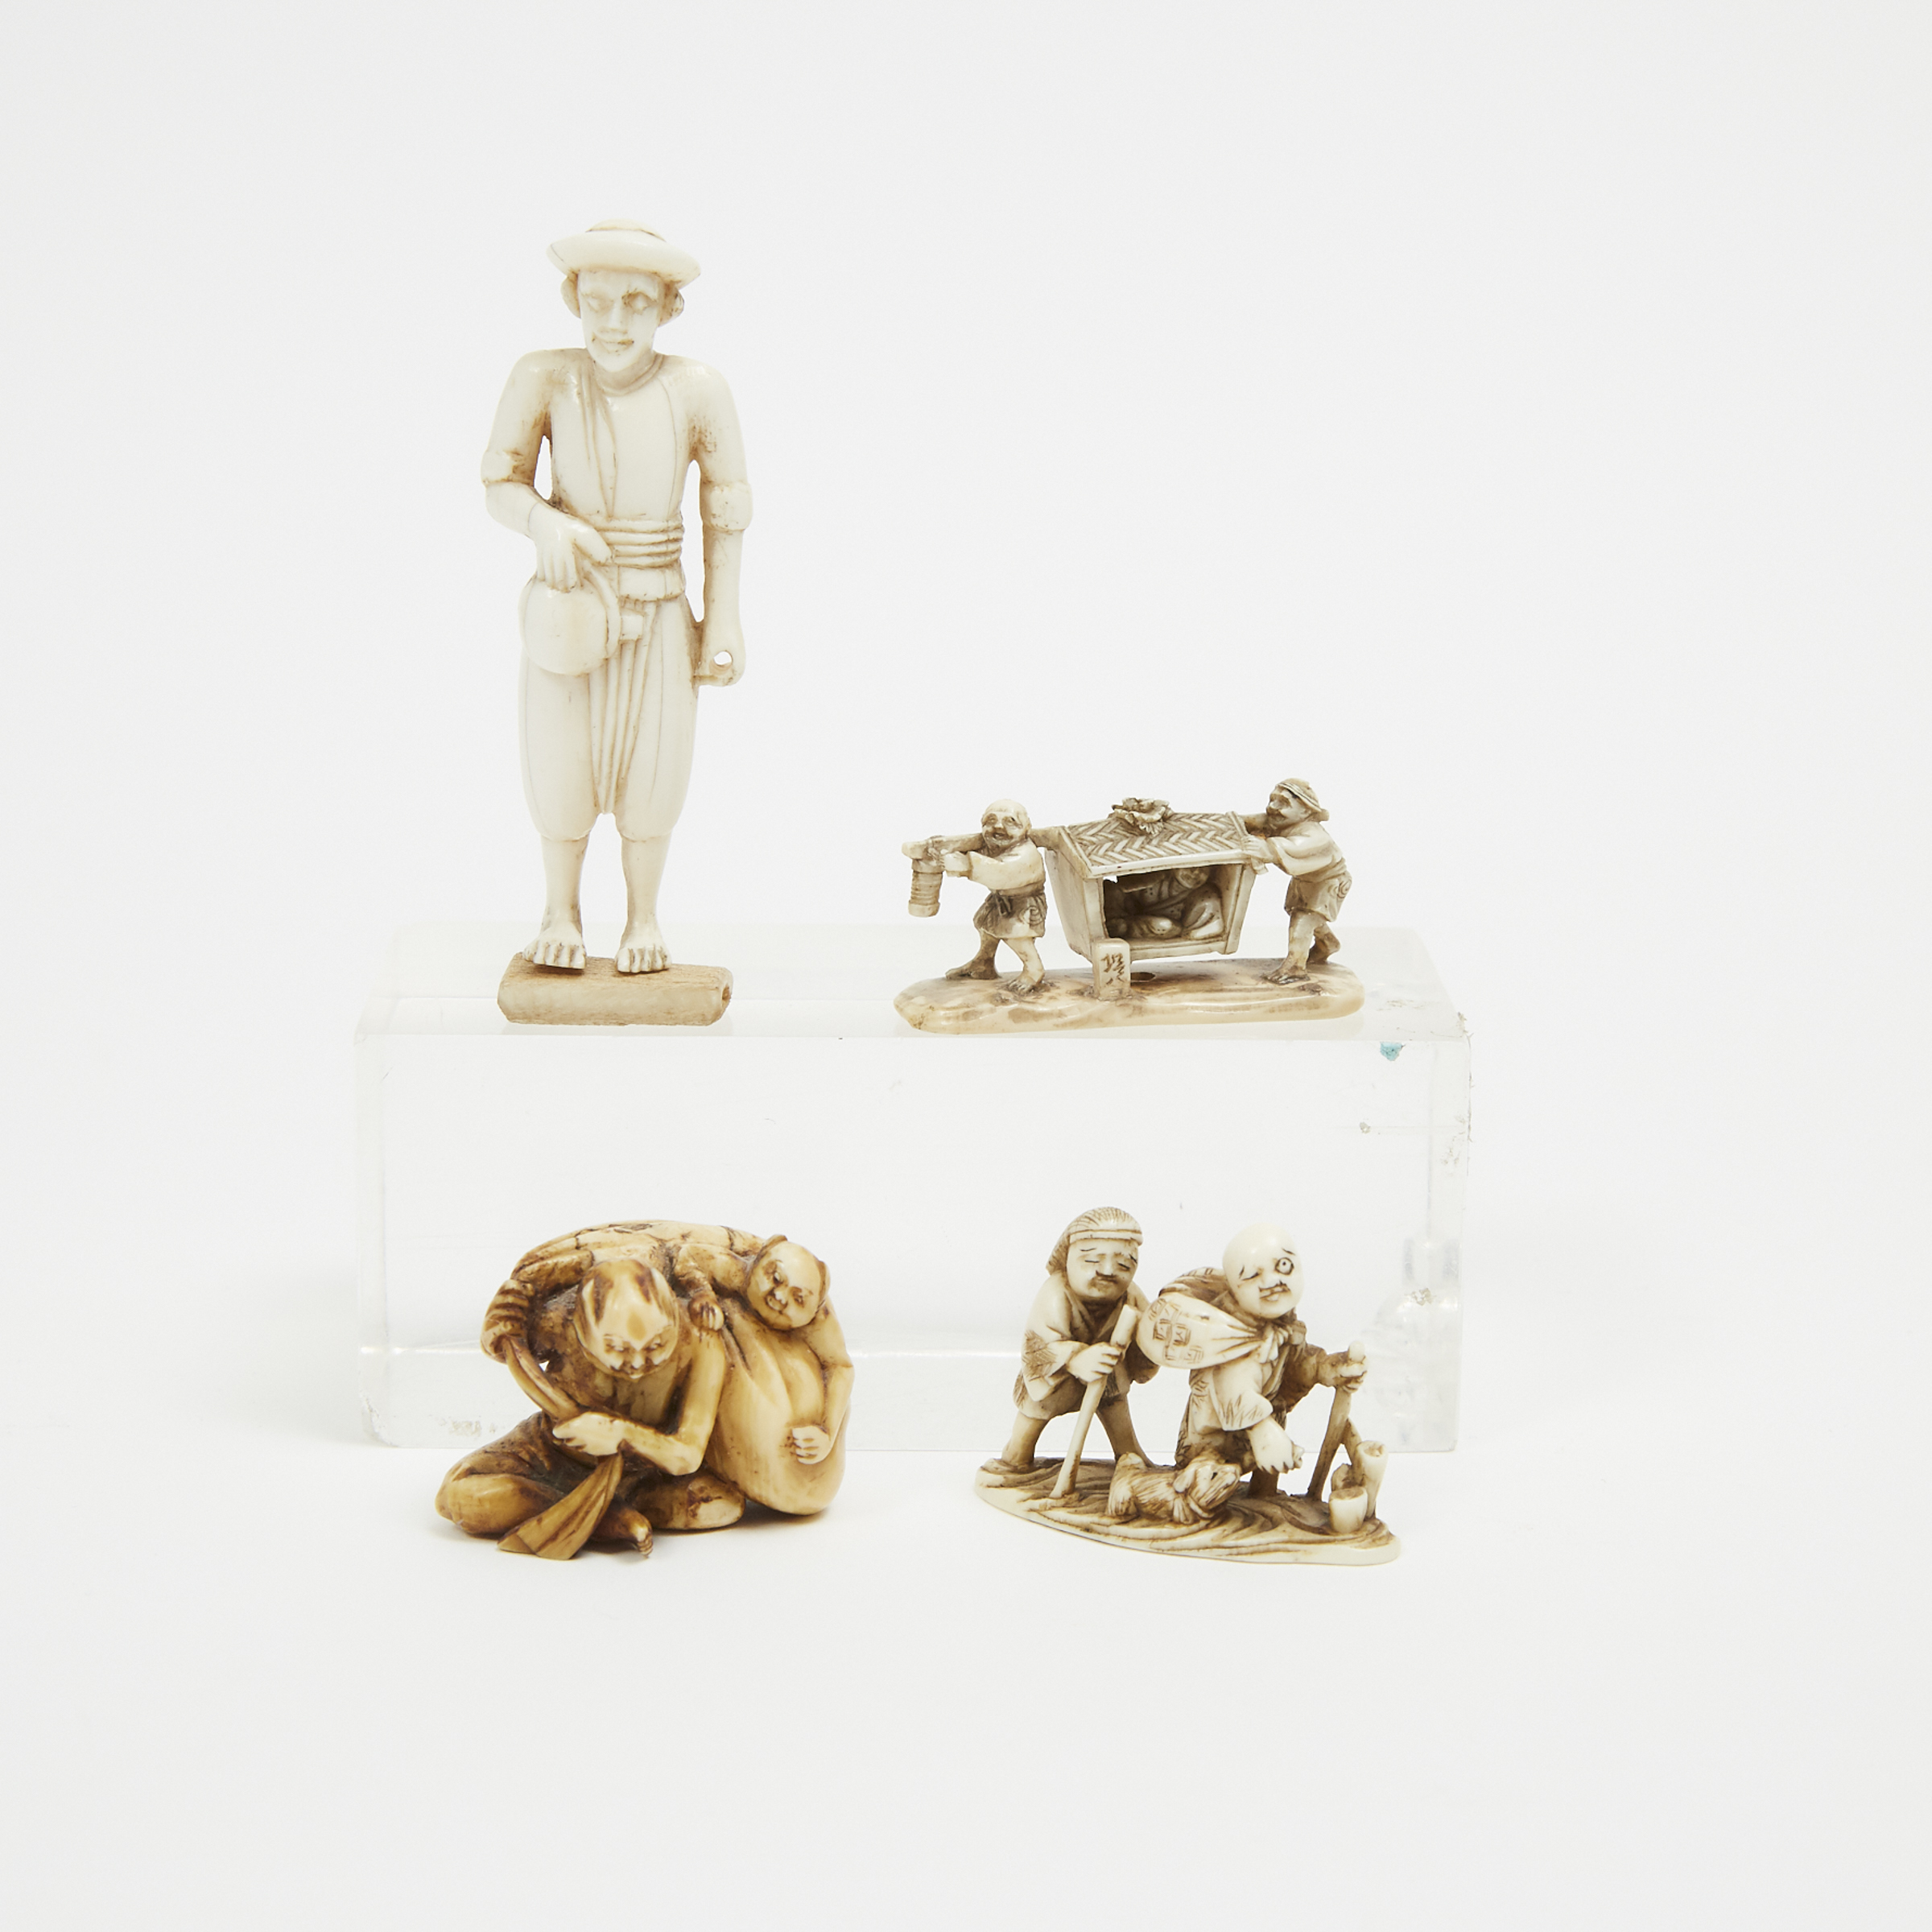 A Group of Four Ivory Carved Figural Netsuke, 19th Century and Later